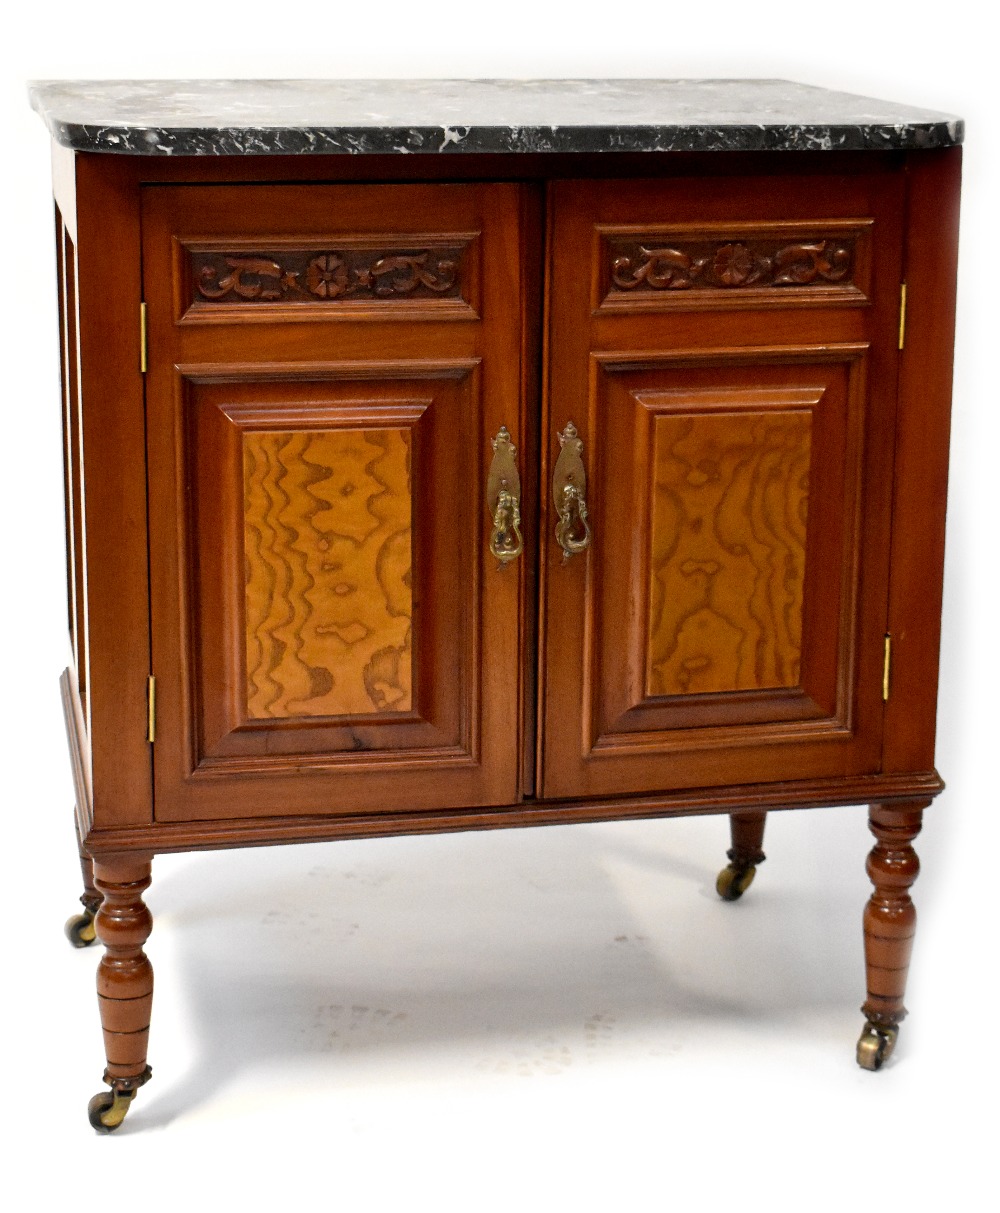 An Edwardian-style walnut marble-top wash stand with pair of carved panelled cupboard doors,